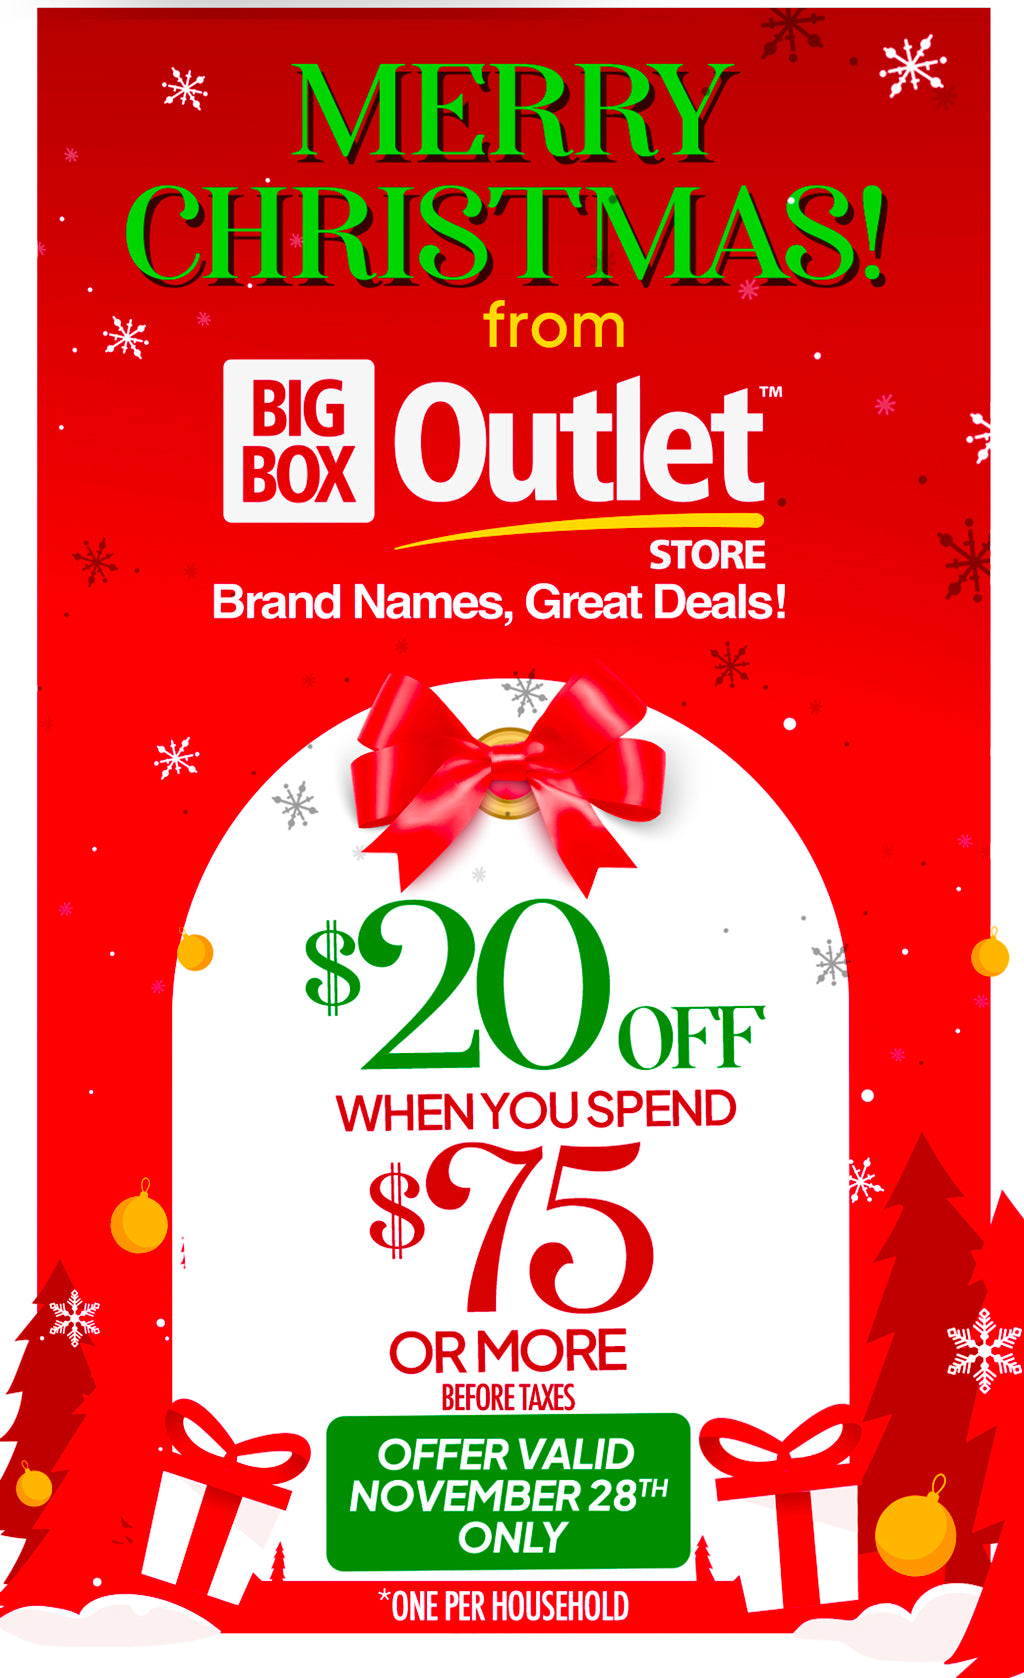 MERRY CHRISTMAS FROM BIG BOX OUTLET STORE! €20 OFF WHEN YOU SPEND €75 OR MORE BEFORE TAXES! OFFER VALID NOVEMBER 28 ONLY!